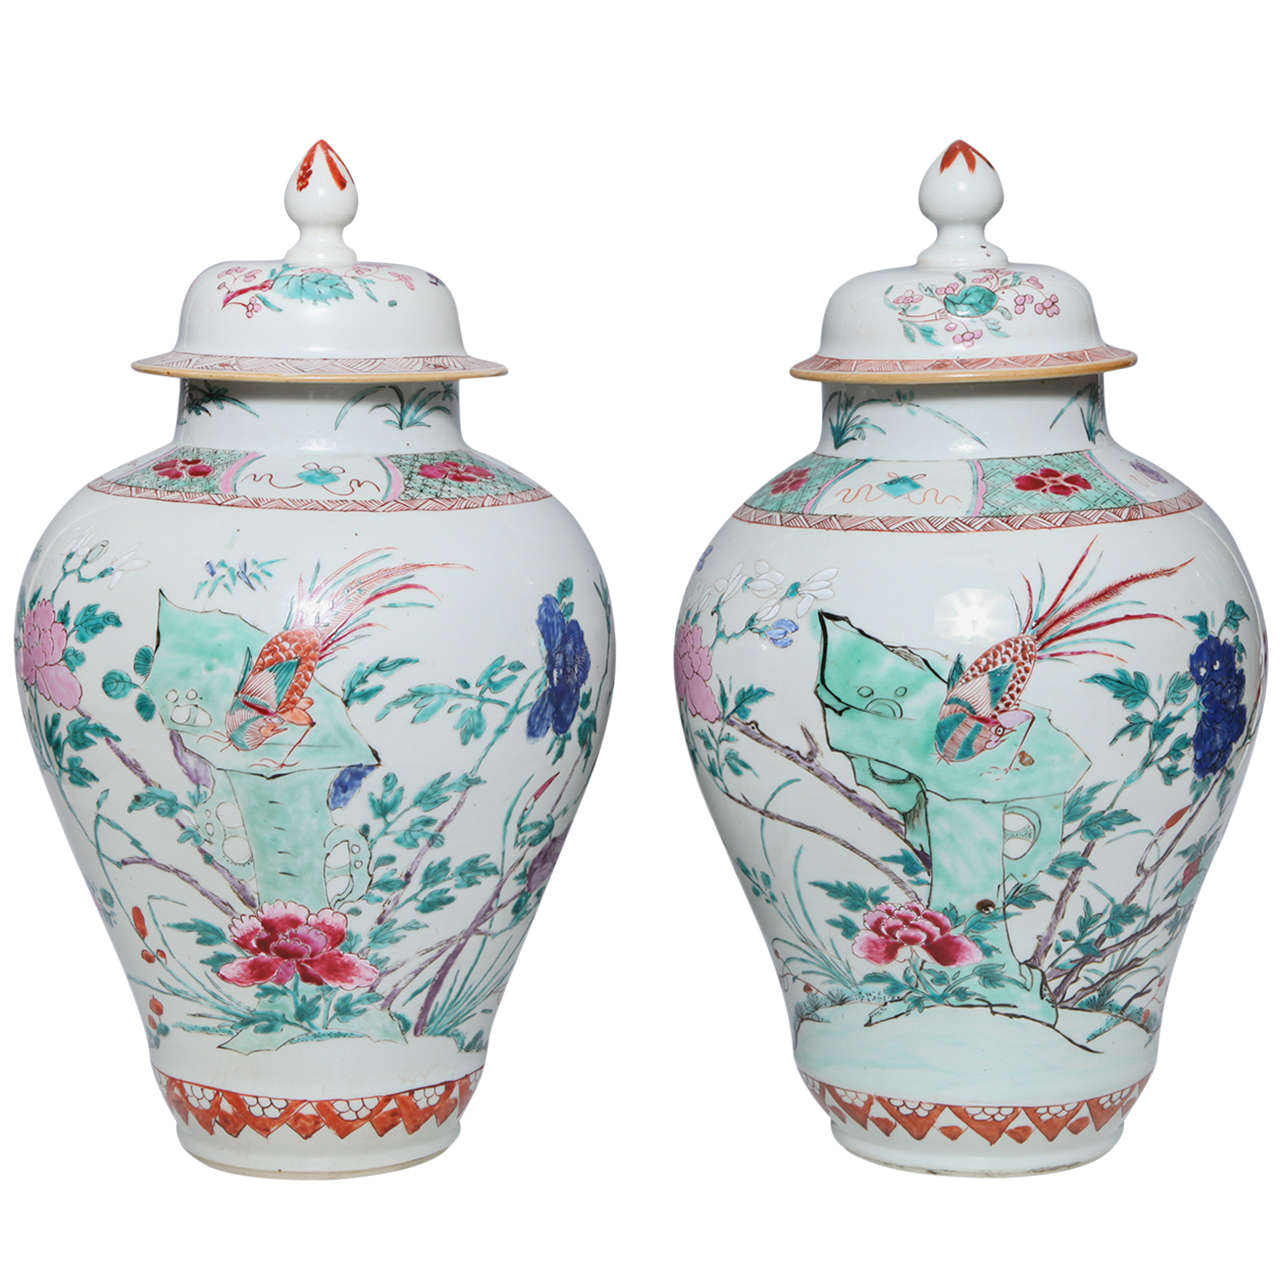 Pair of 18th Century Chinese Export Porcelain Famille Rose Covered Jars